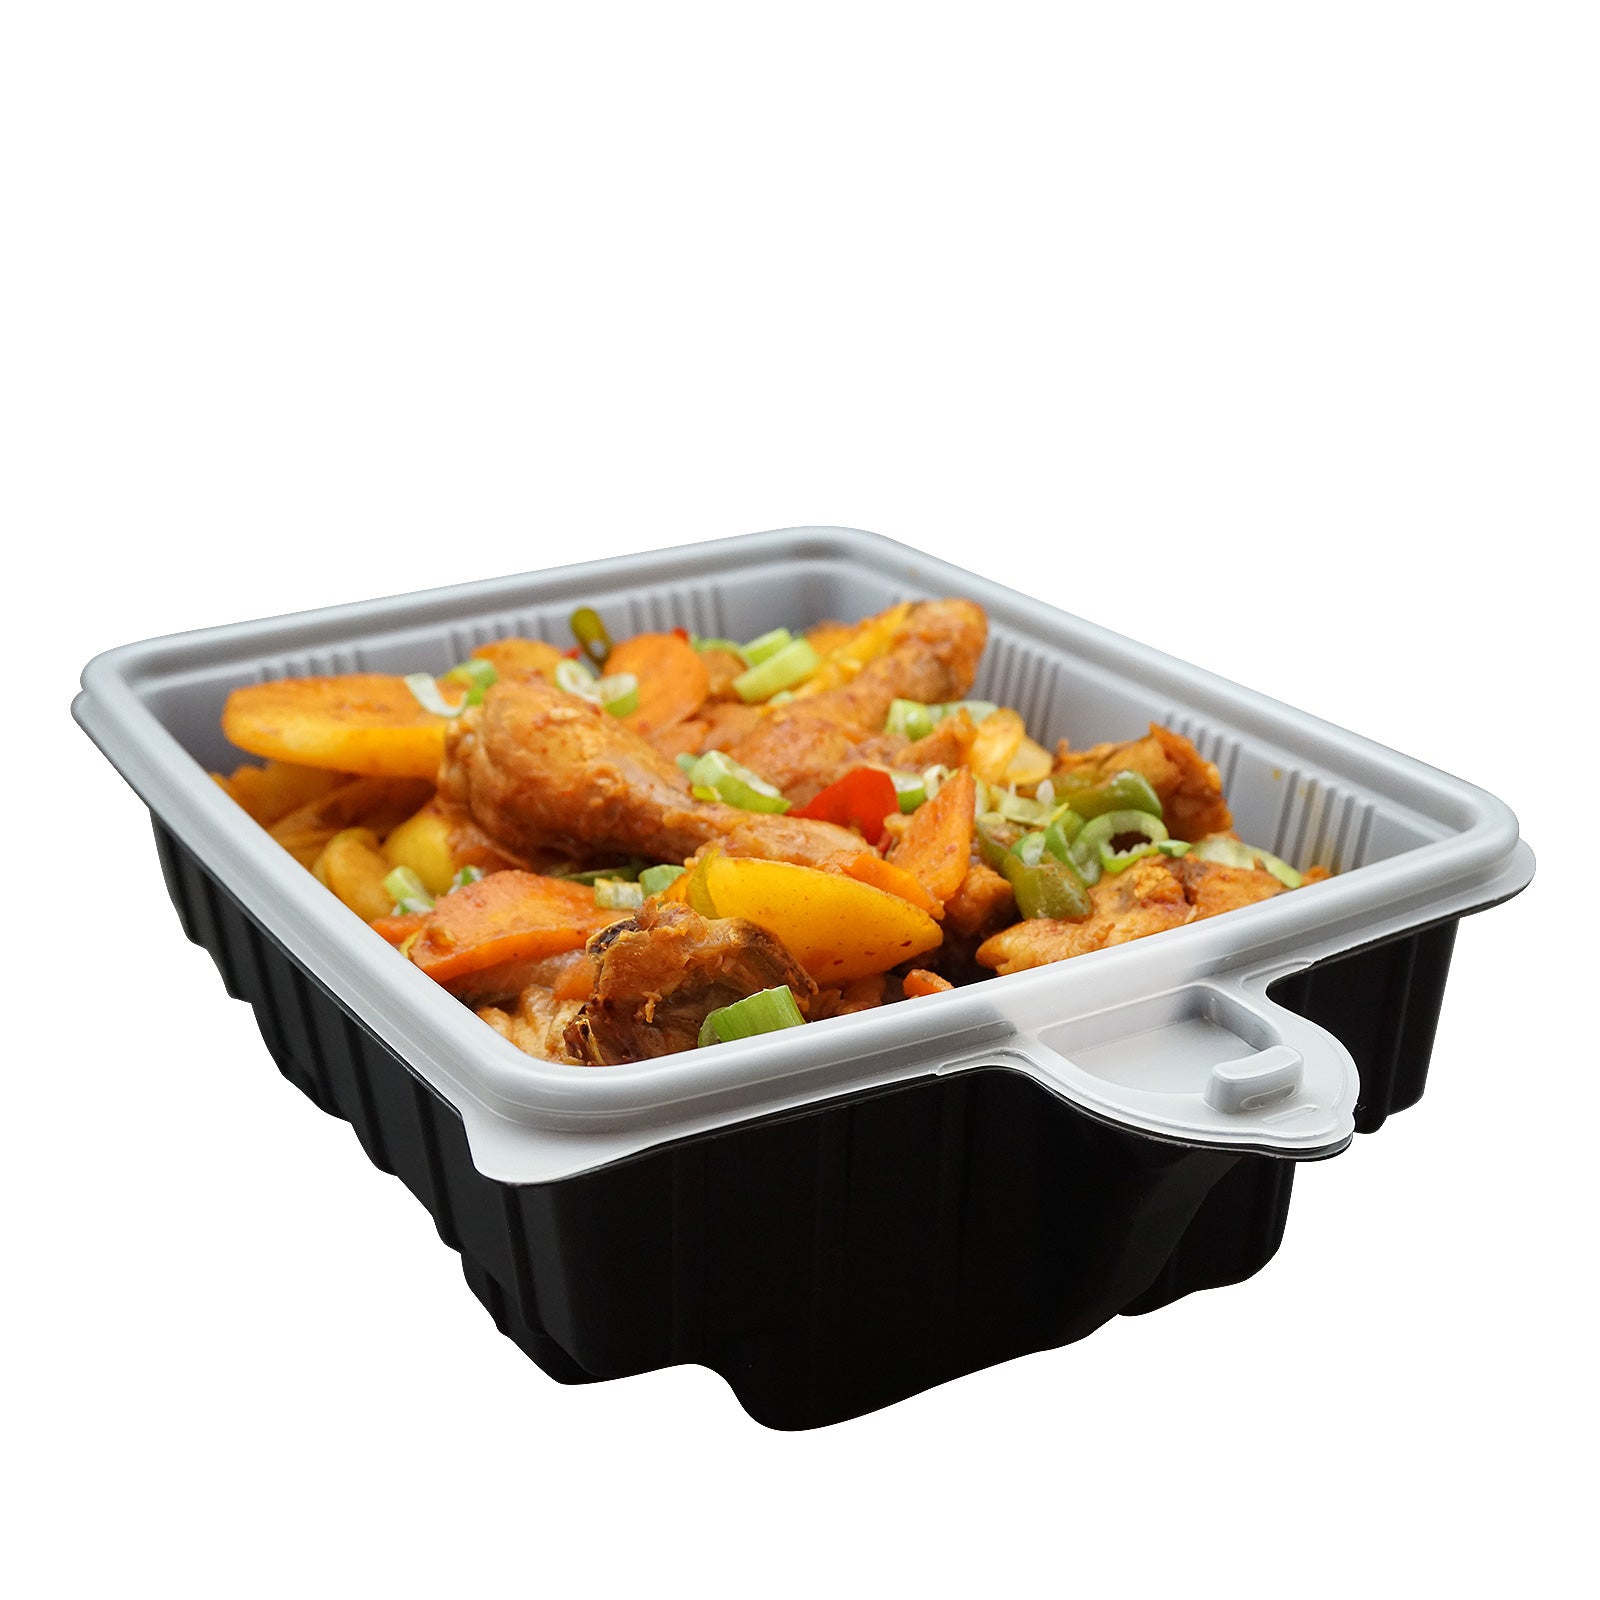 Sirak Food 20-Pack Dalat Heating Lunch Box Container 33cm Rectangle | Convenient Lunch Containers